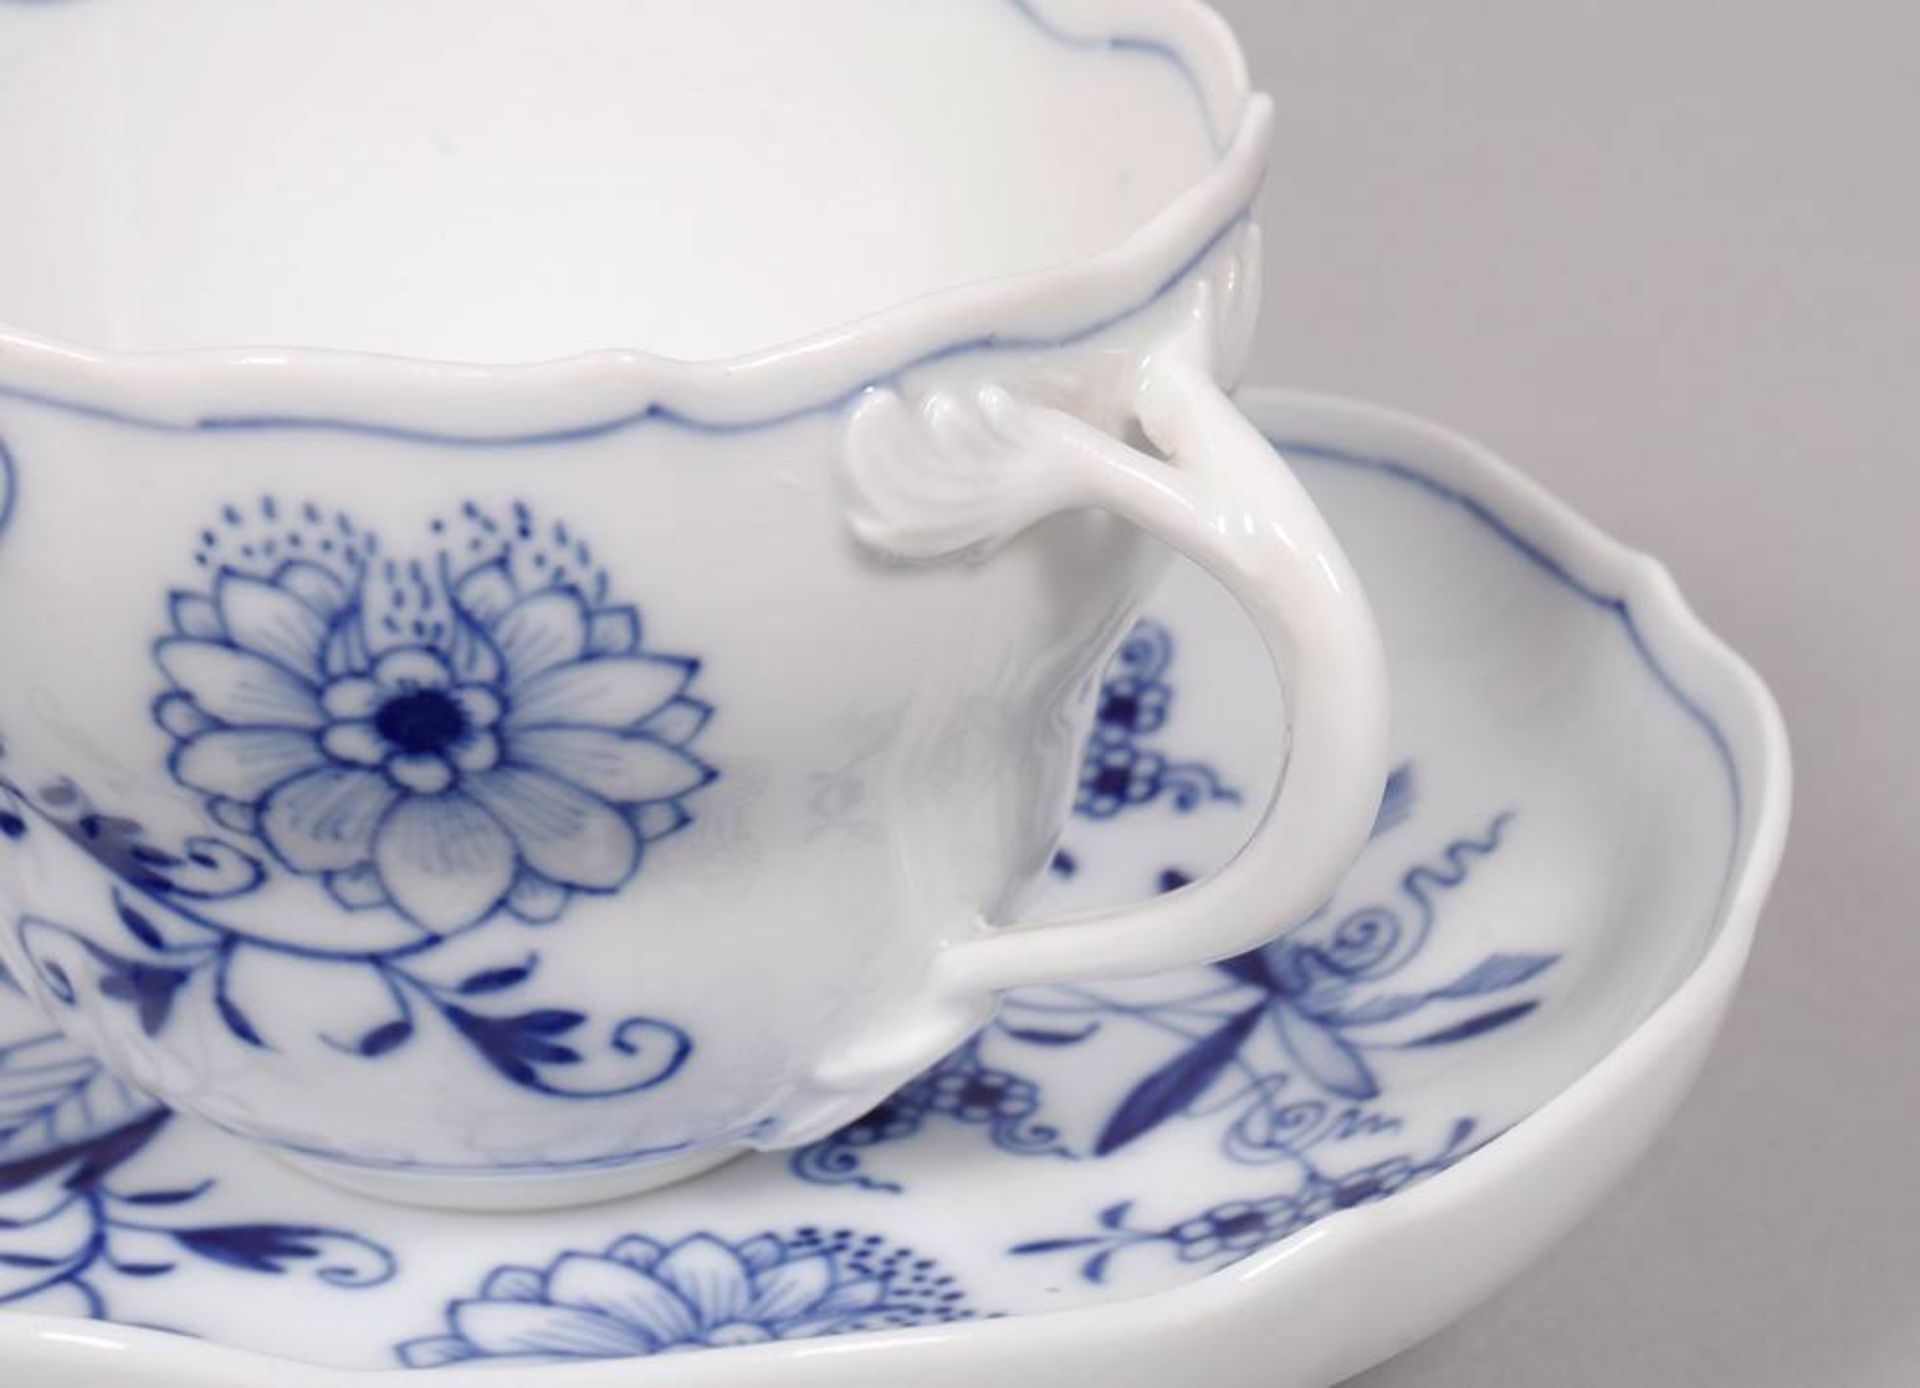 4 cups and saucers, Meissen, c. 1900 - Image 5 of 8